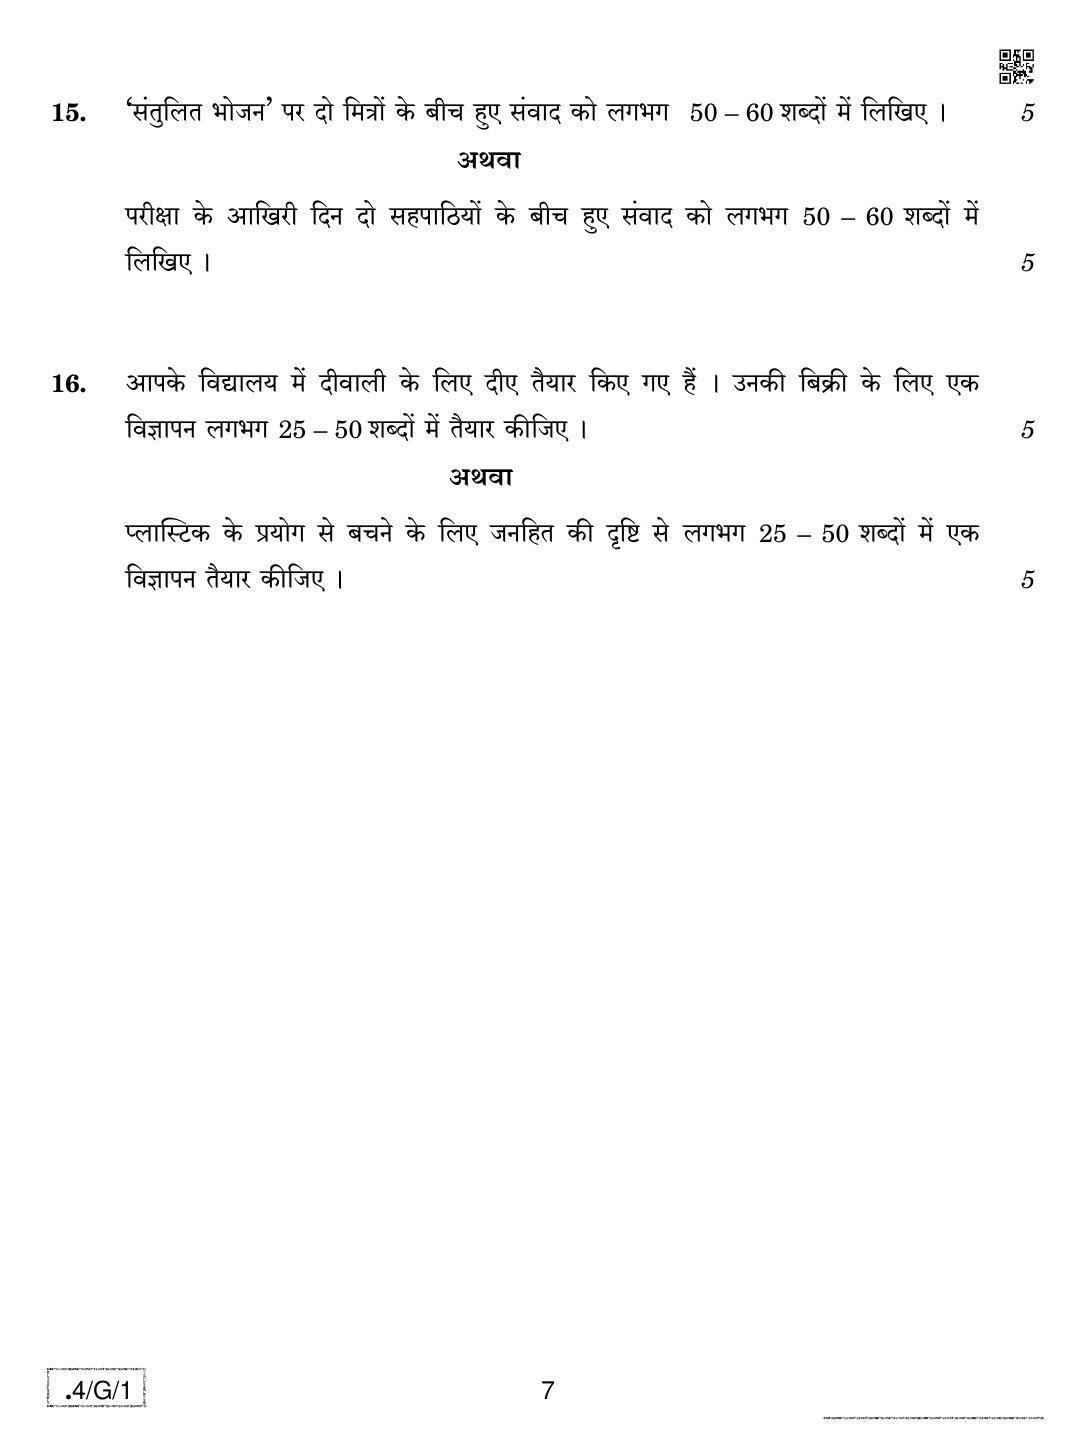 CBSE Class 10 4-C-1 Hindi B 2020 Compartment Question Paper - Page 7